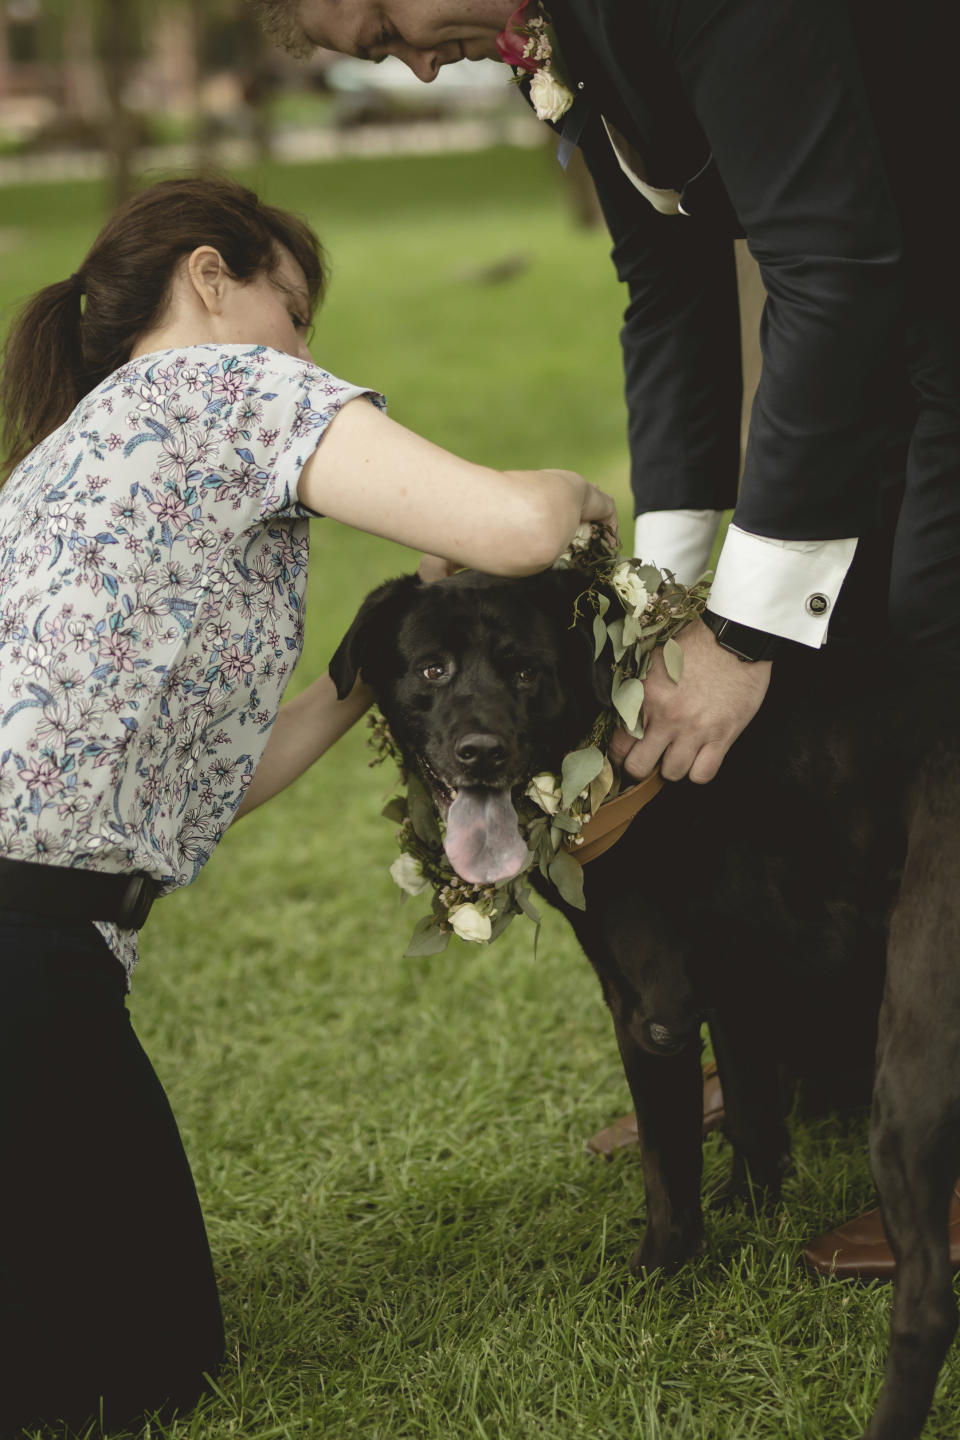 In this June 8, 2018 photo, Lara Leinen of Doggy Social MN LLC prepares Shelby for the wedding of her owners Kelley and Shawn Ballanger in Saint Paul, Minn. It's no longer unusual for brides and grooms to include pets in their wedding photos or even in the ceremony. But it can be tough to manage that along with everything else. (Amber Rishavy/Pixel Dust Photography/Lara Leinen via AP)